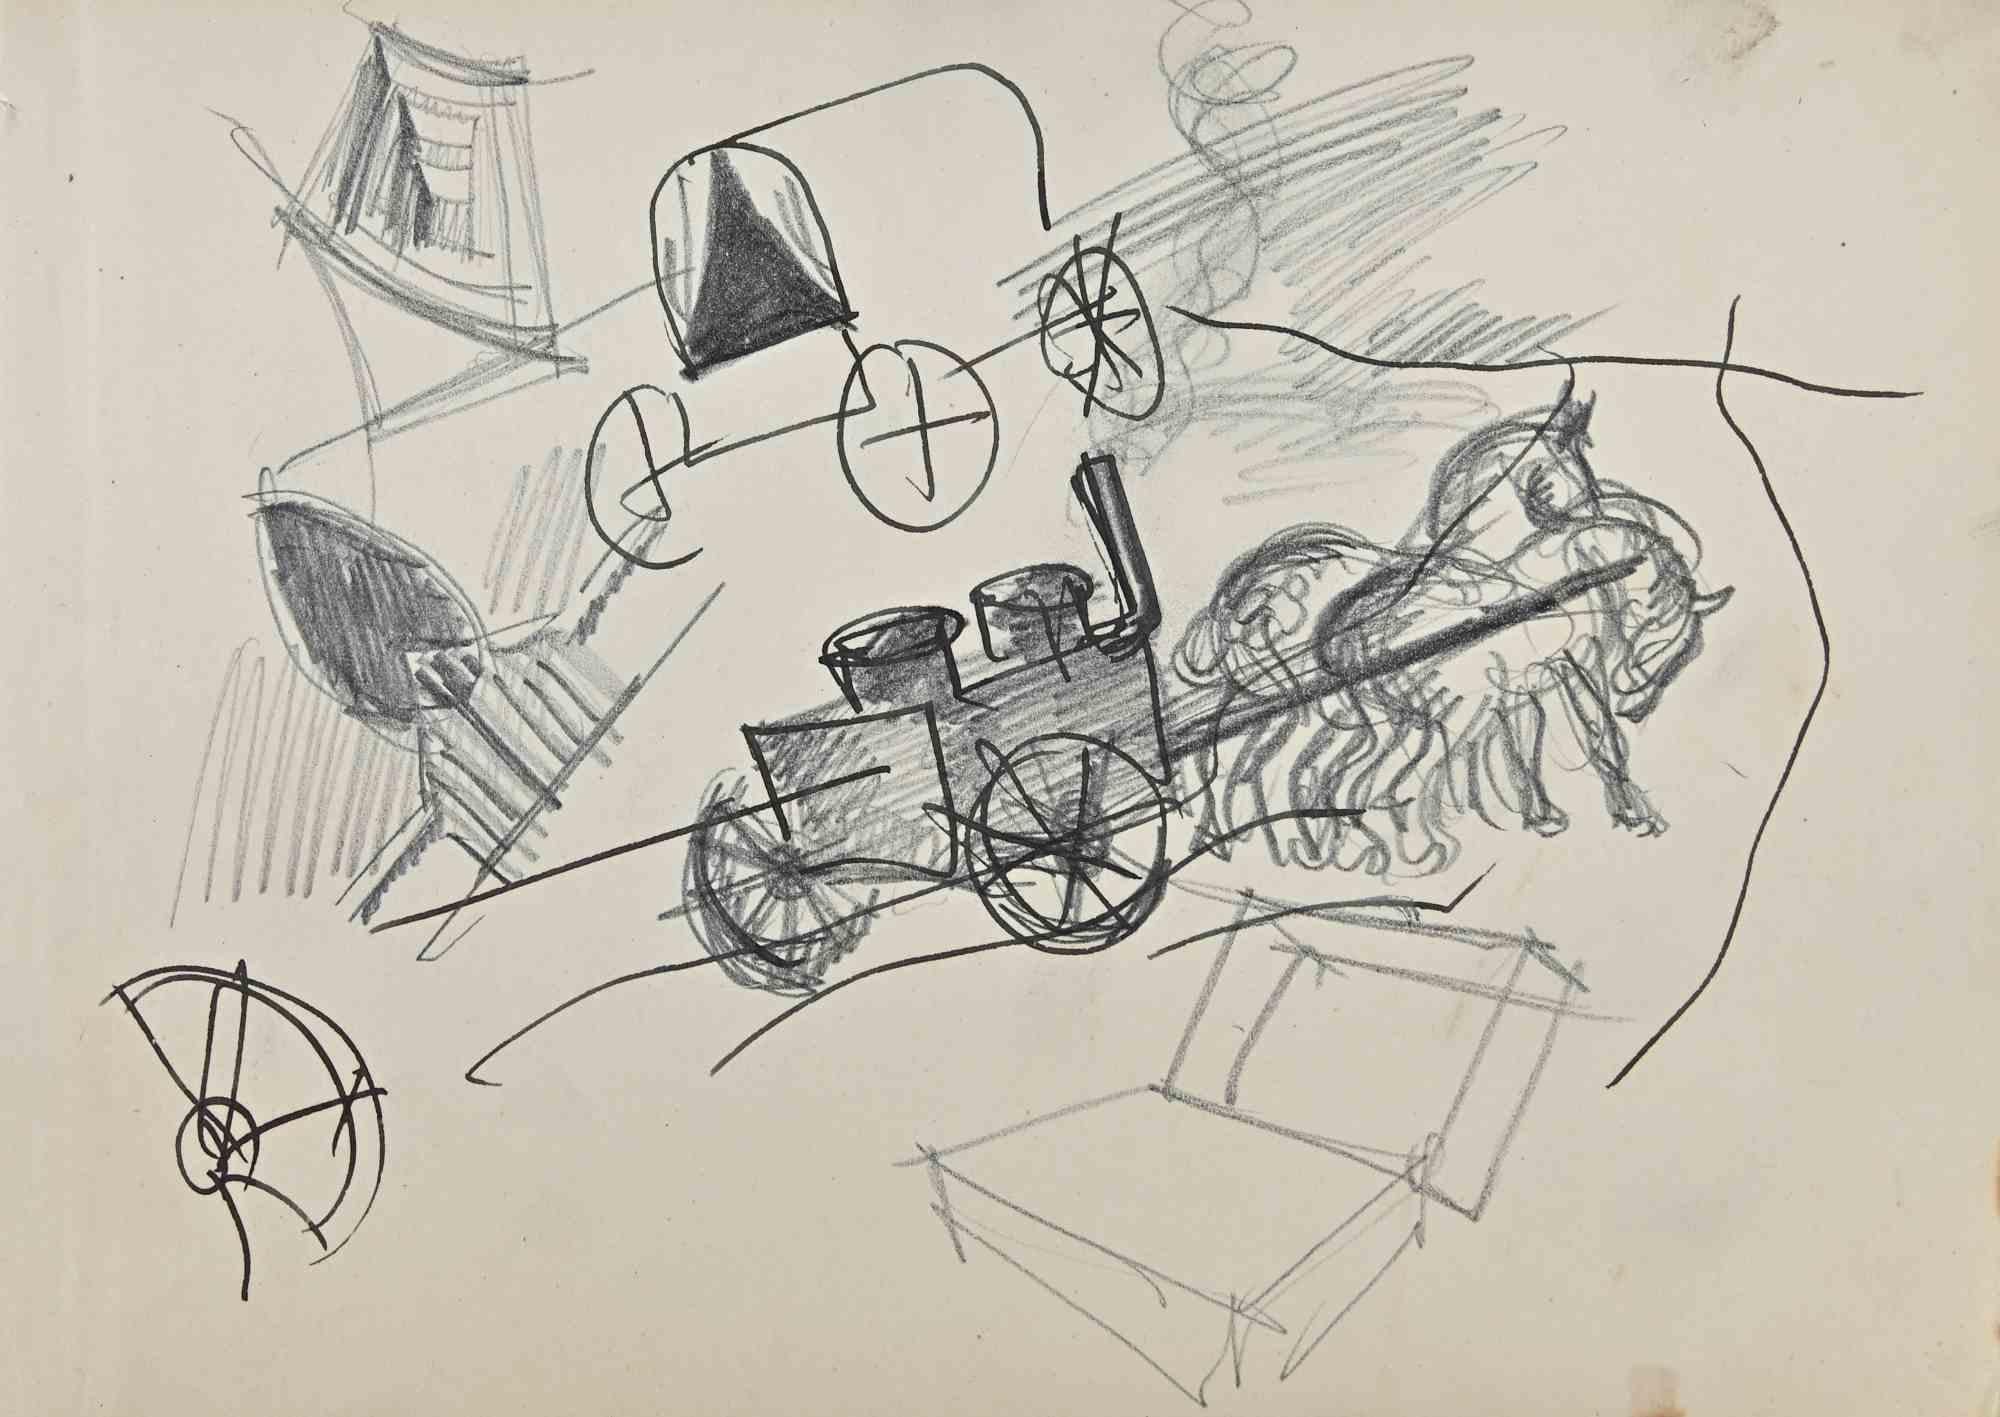 The Carriage is an original Drawing on paper realized by French painter Norbert Meyre in the mid-20 century.

Drawing in pencil and pen.

Good conditions.

The artwork is represented through deft and quick strokes by mastery.

Norbert Meyre is a